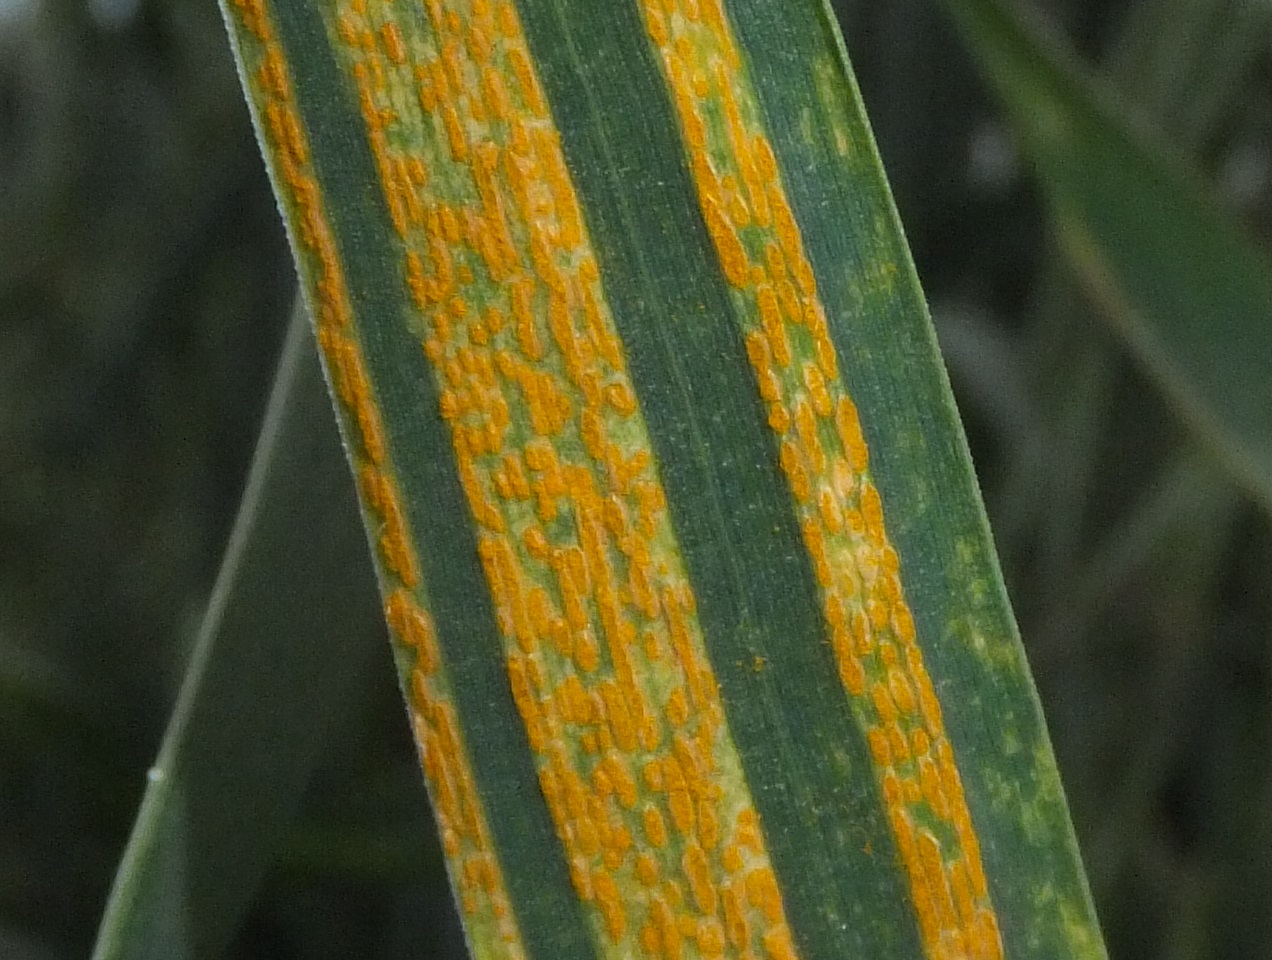 Yellow rust of wheat is one of the three wheat rust diseases principally found in wheat grown in cooler environments